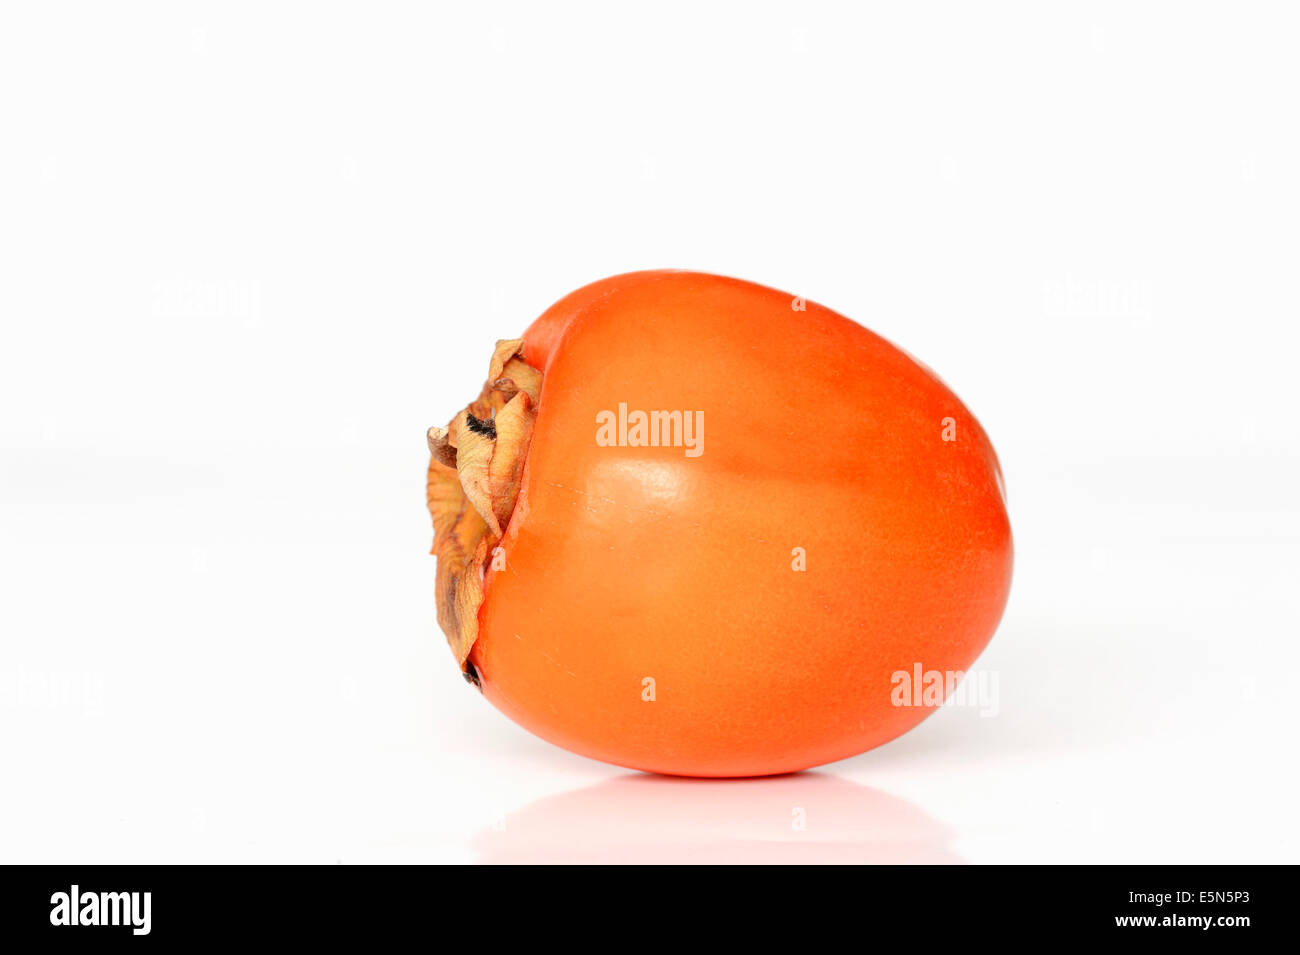 Japanese persimmon Cut Out Stock Images & Pictures - Alamy